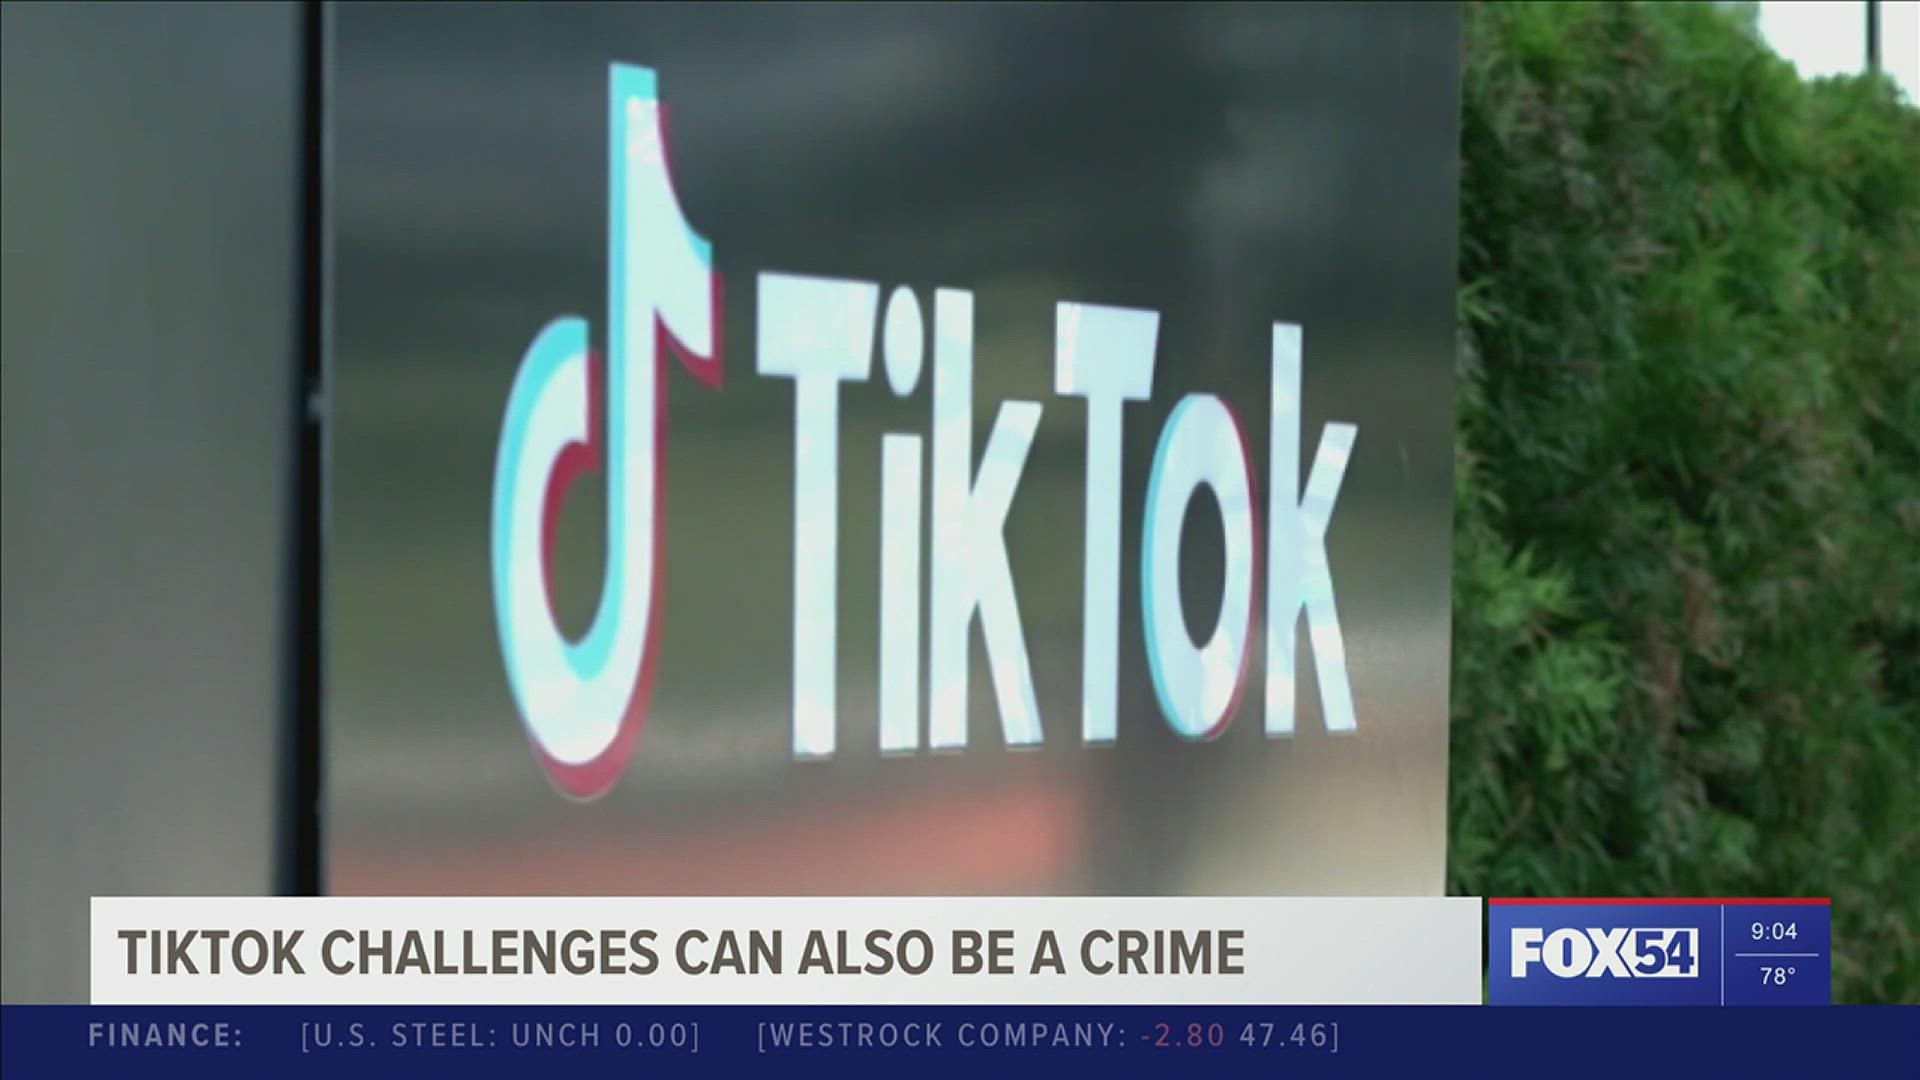 Be careful: TikTok challenges can also be a crime.